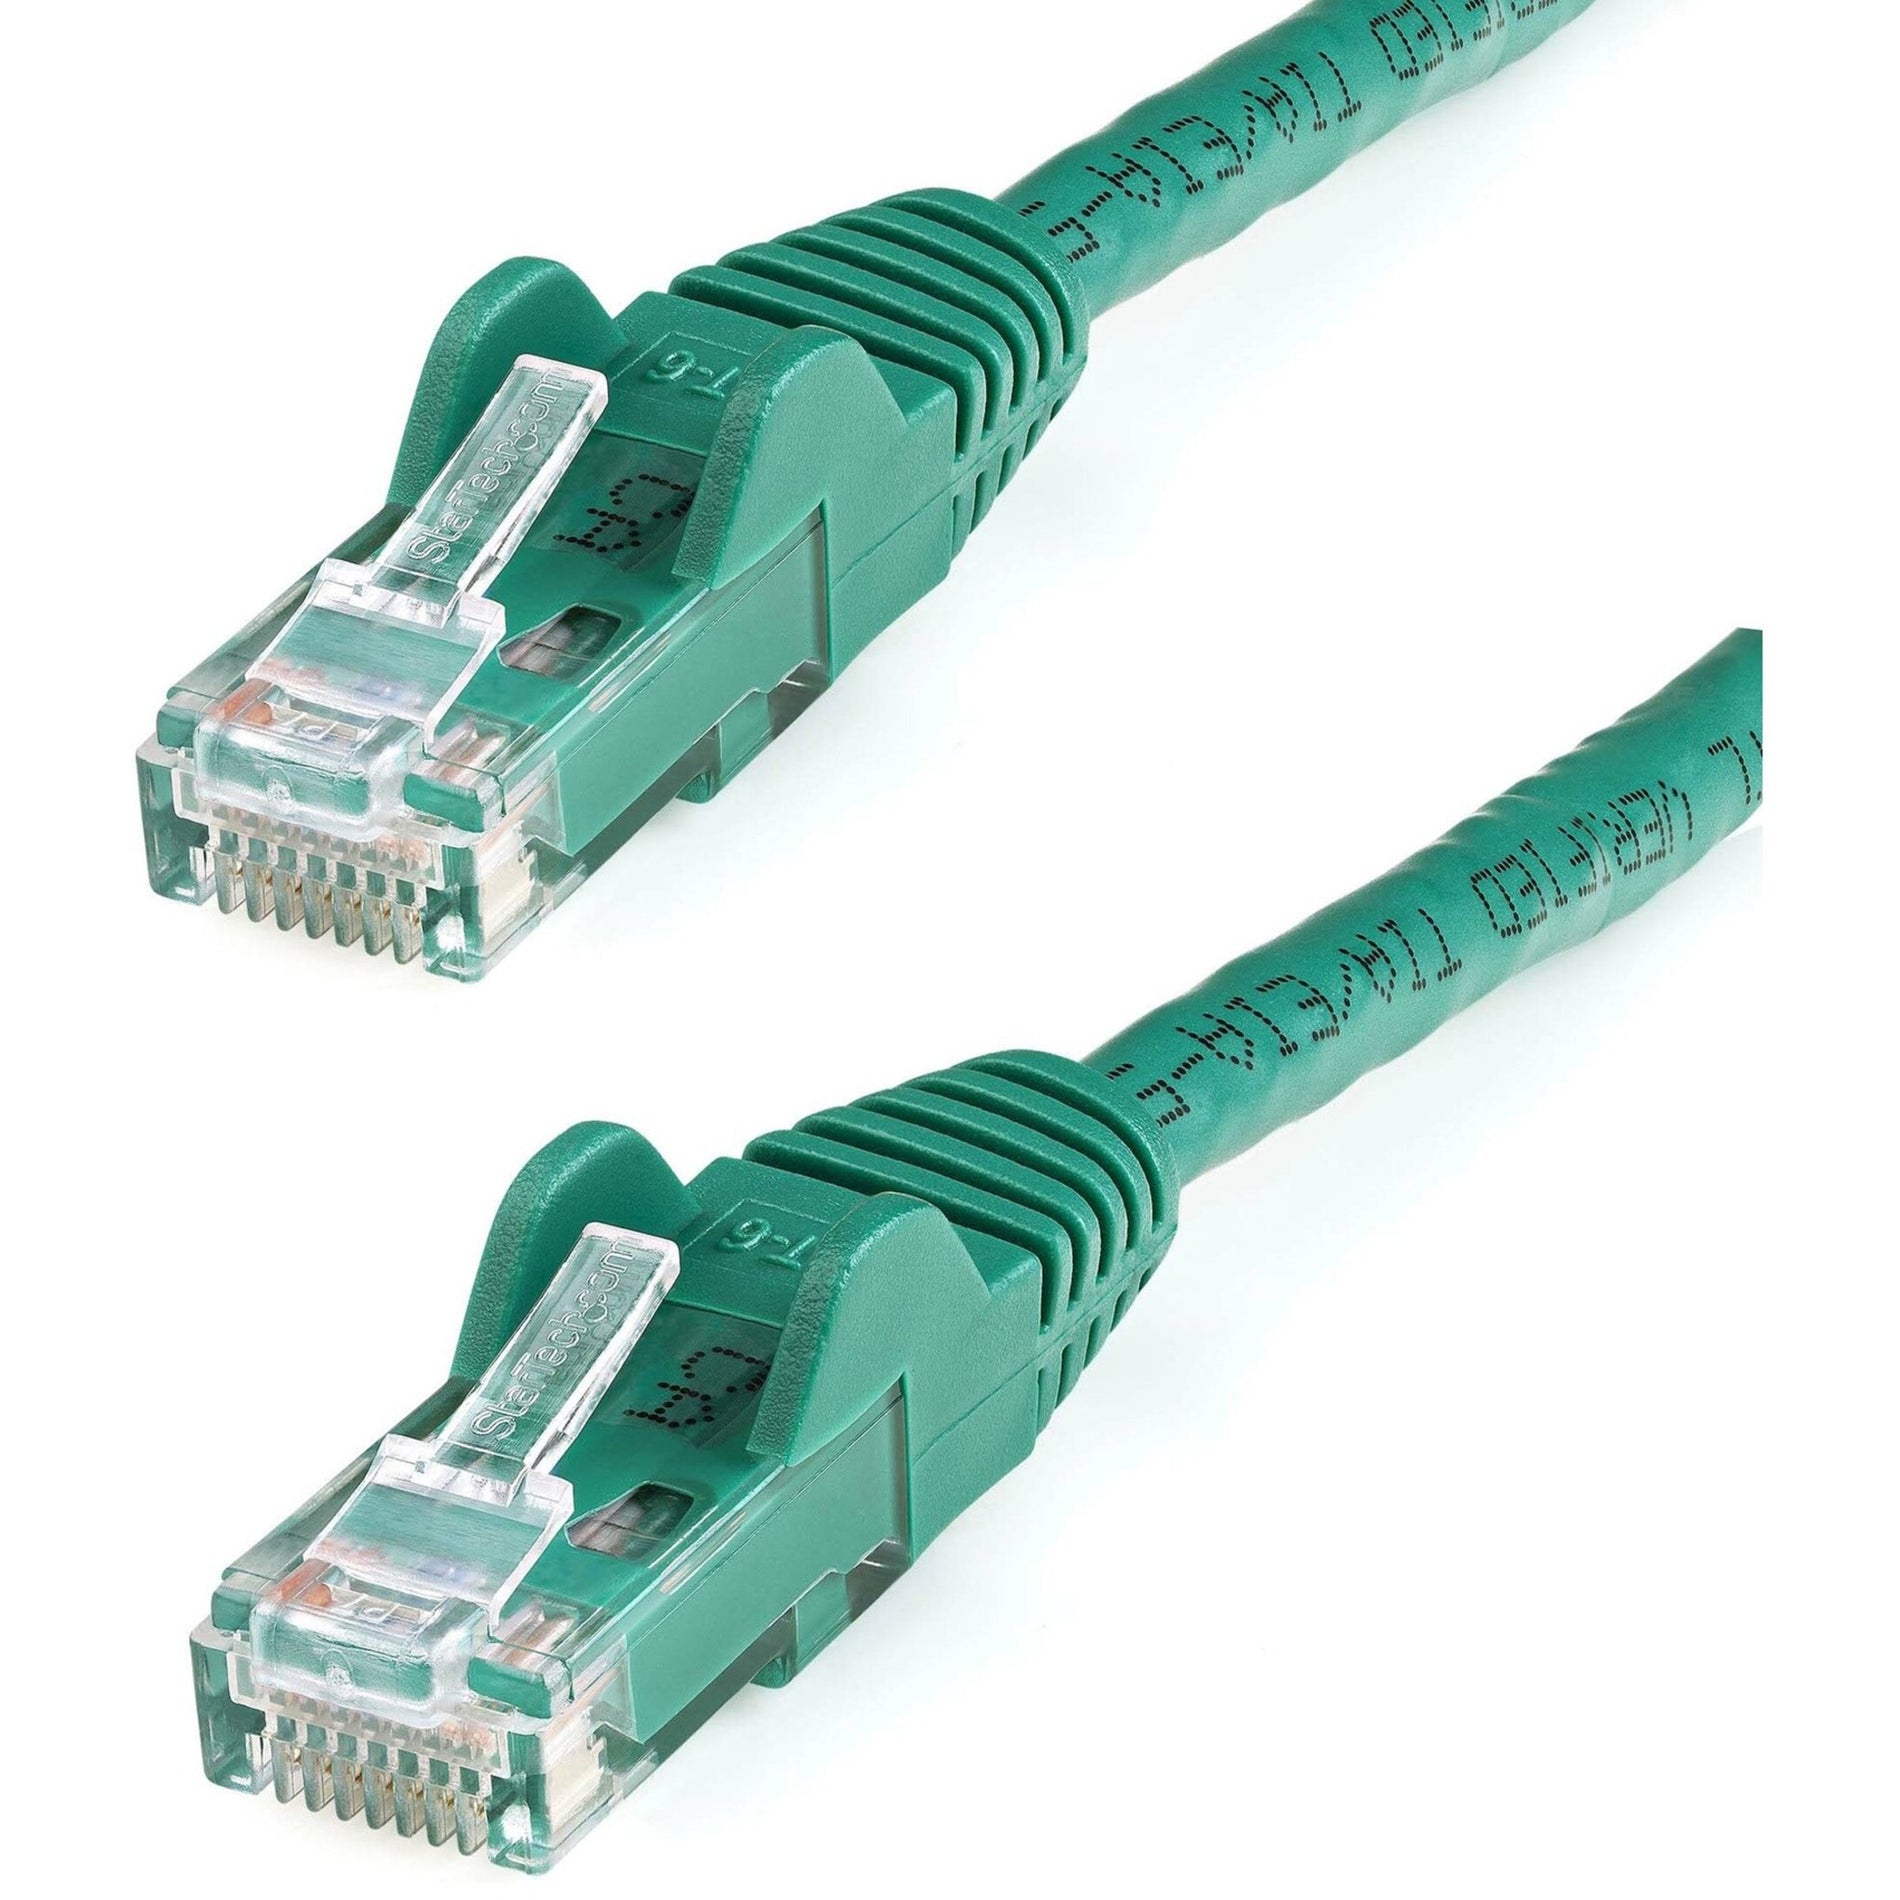 StarTech.com N6PATCH9GN Cat6 Patch Cable, 9 ft Green Ethernet Cable, Snagless RJ45 Connectors